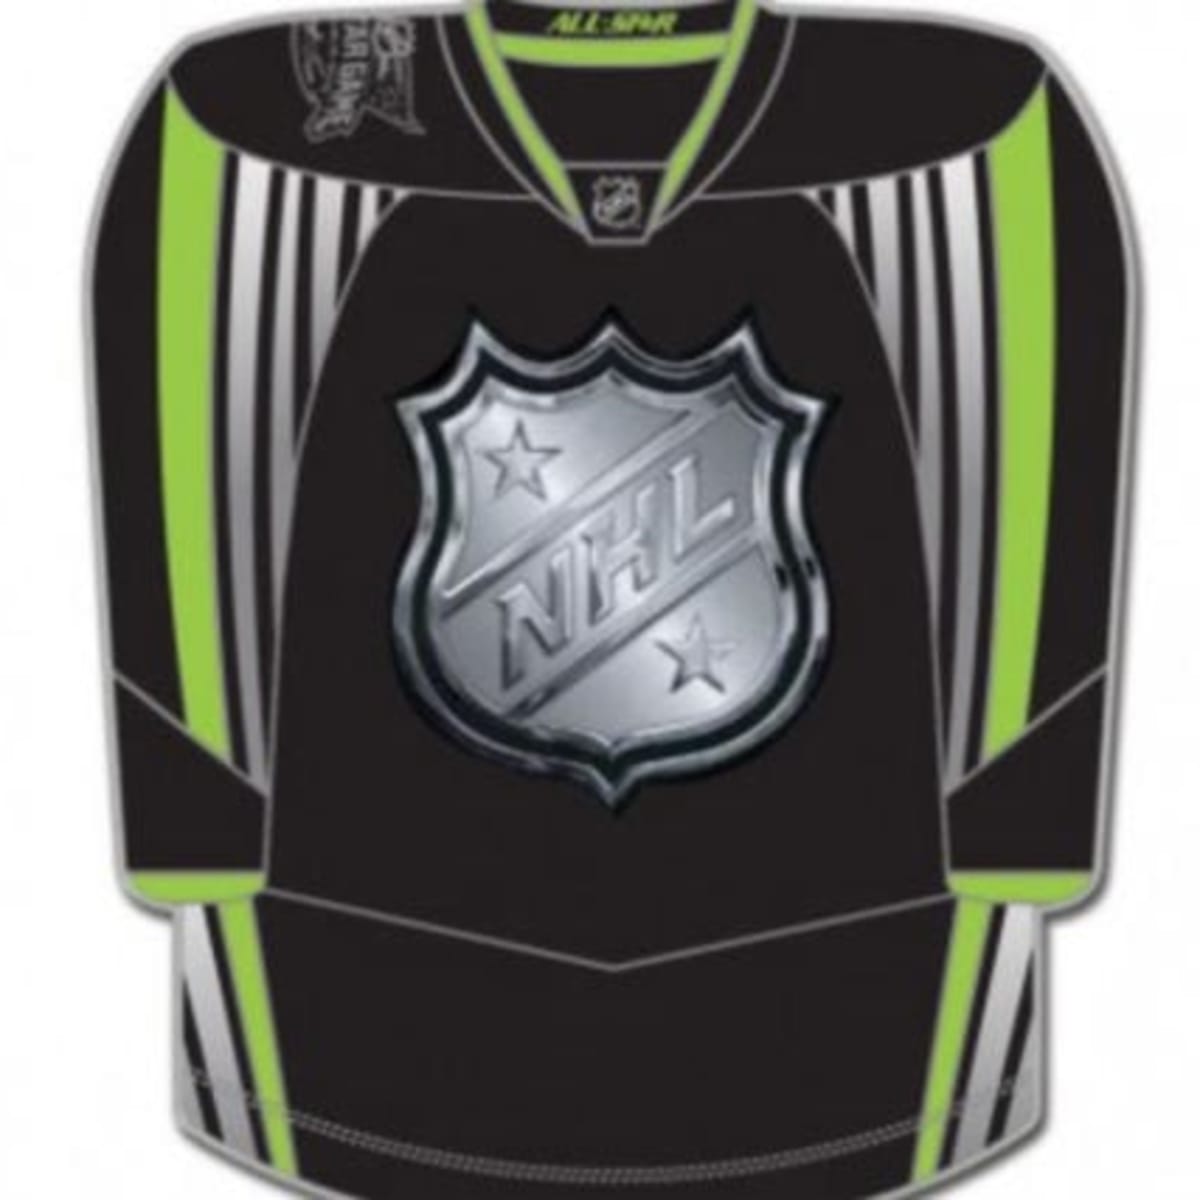 Leaked images show neon All-Star jerseys could be on the horizon